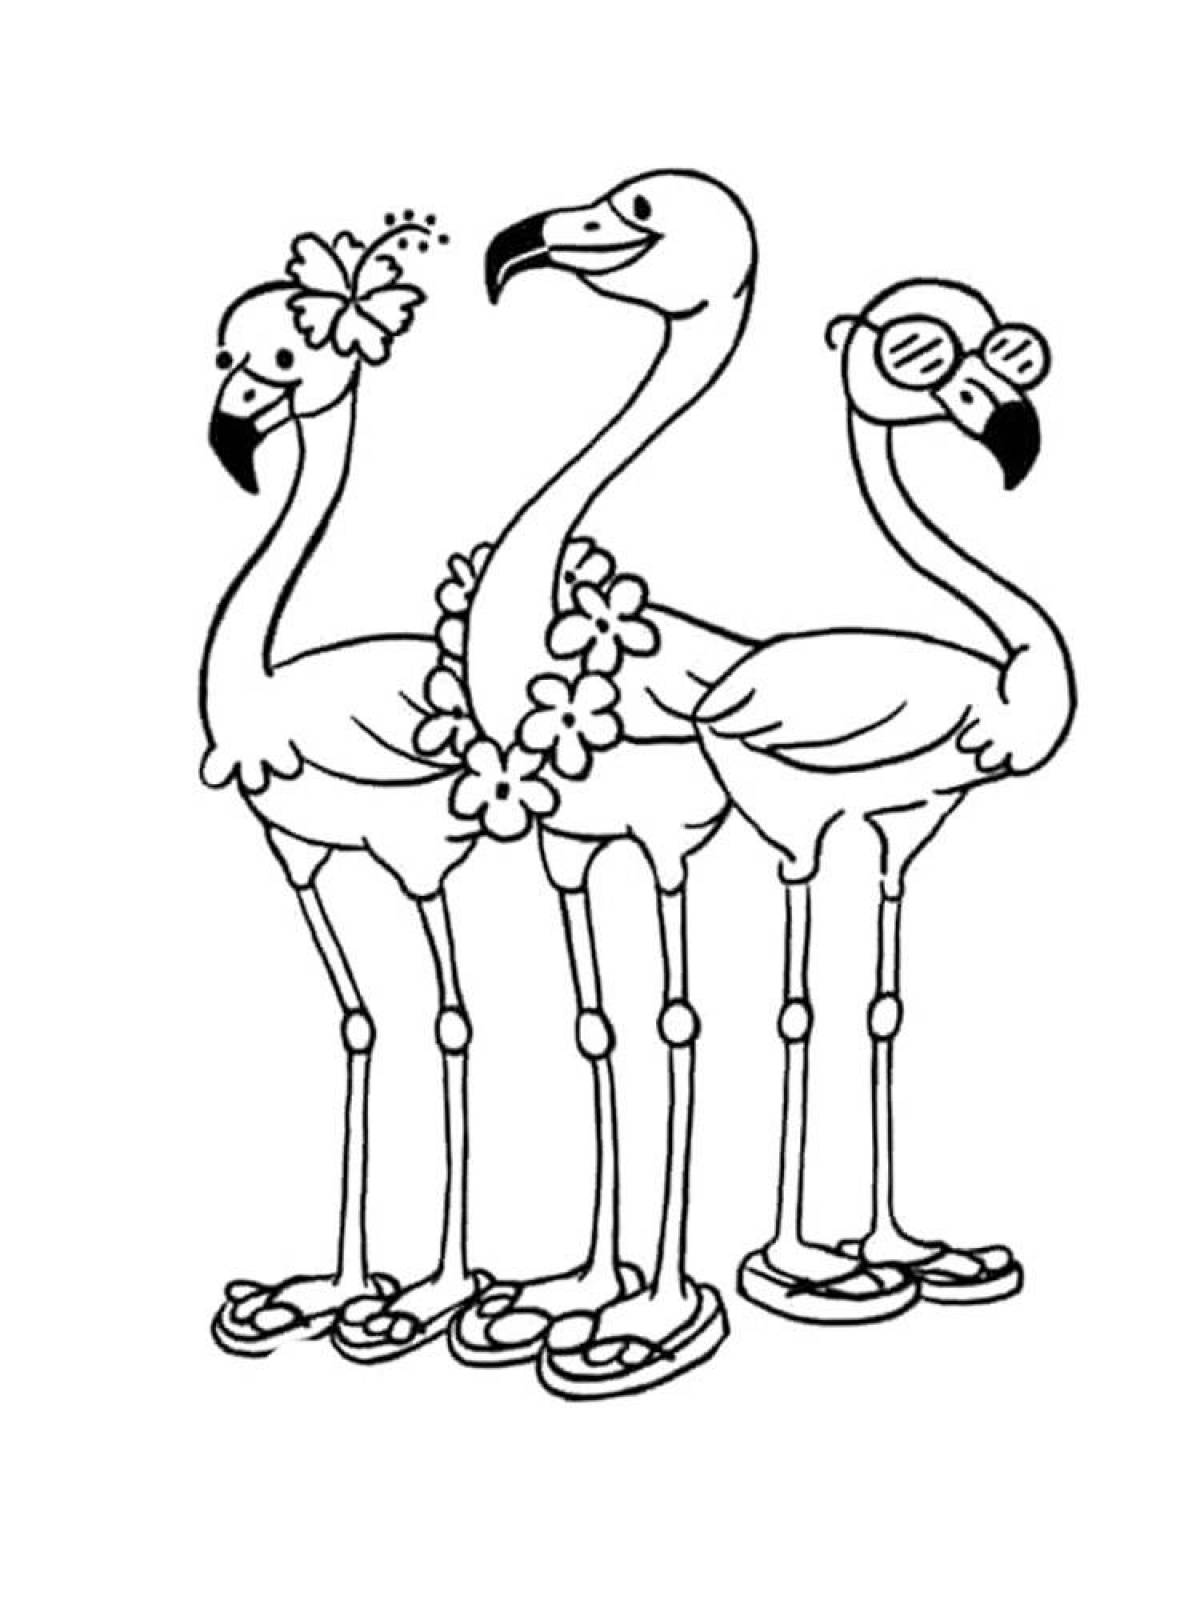 Majestic flamingos coloring pages for kids